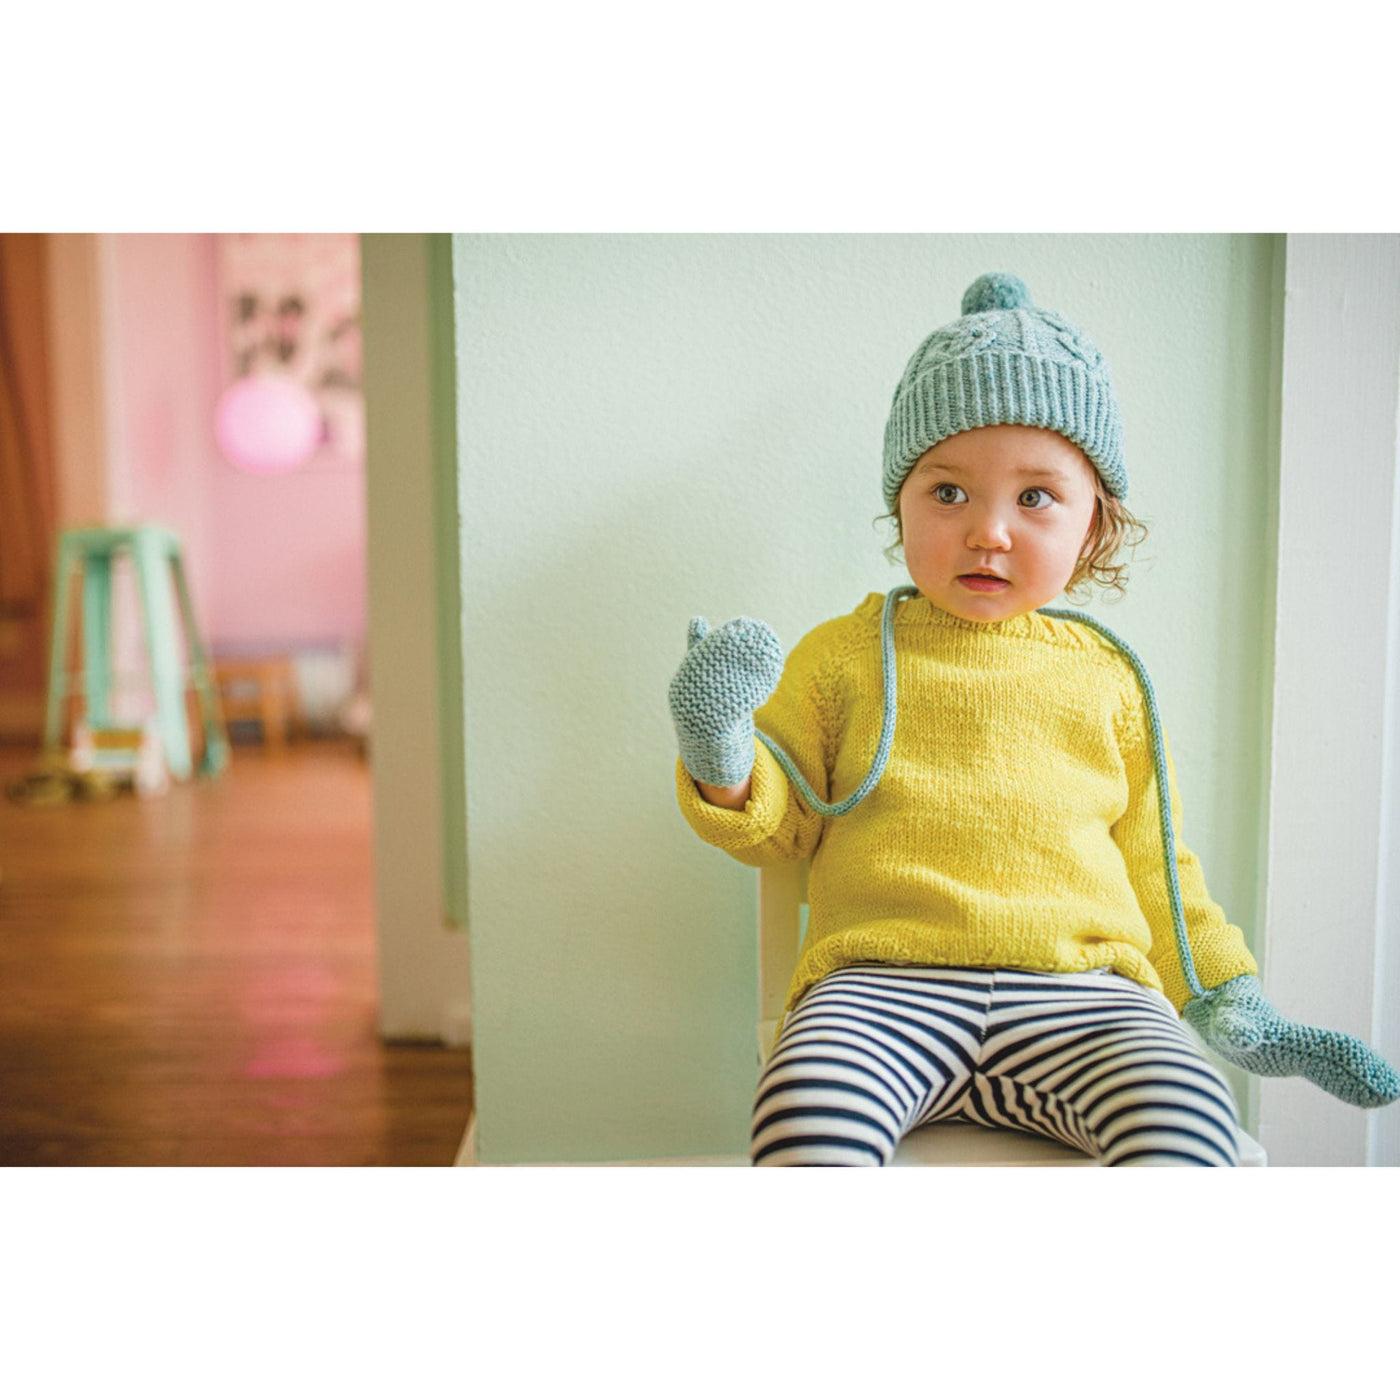 Child wearing handknit hat and mitts which are designs from Mini Pom magazine.